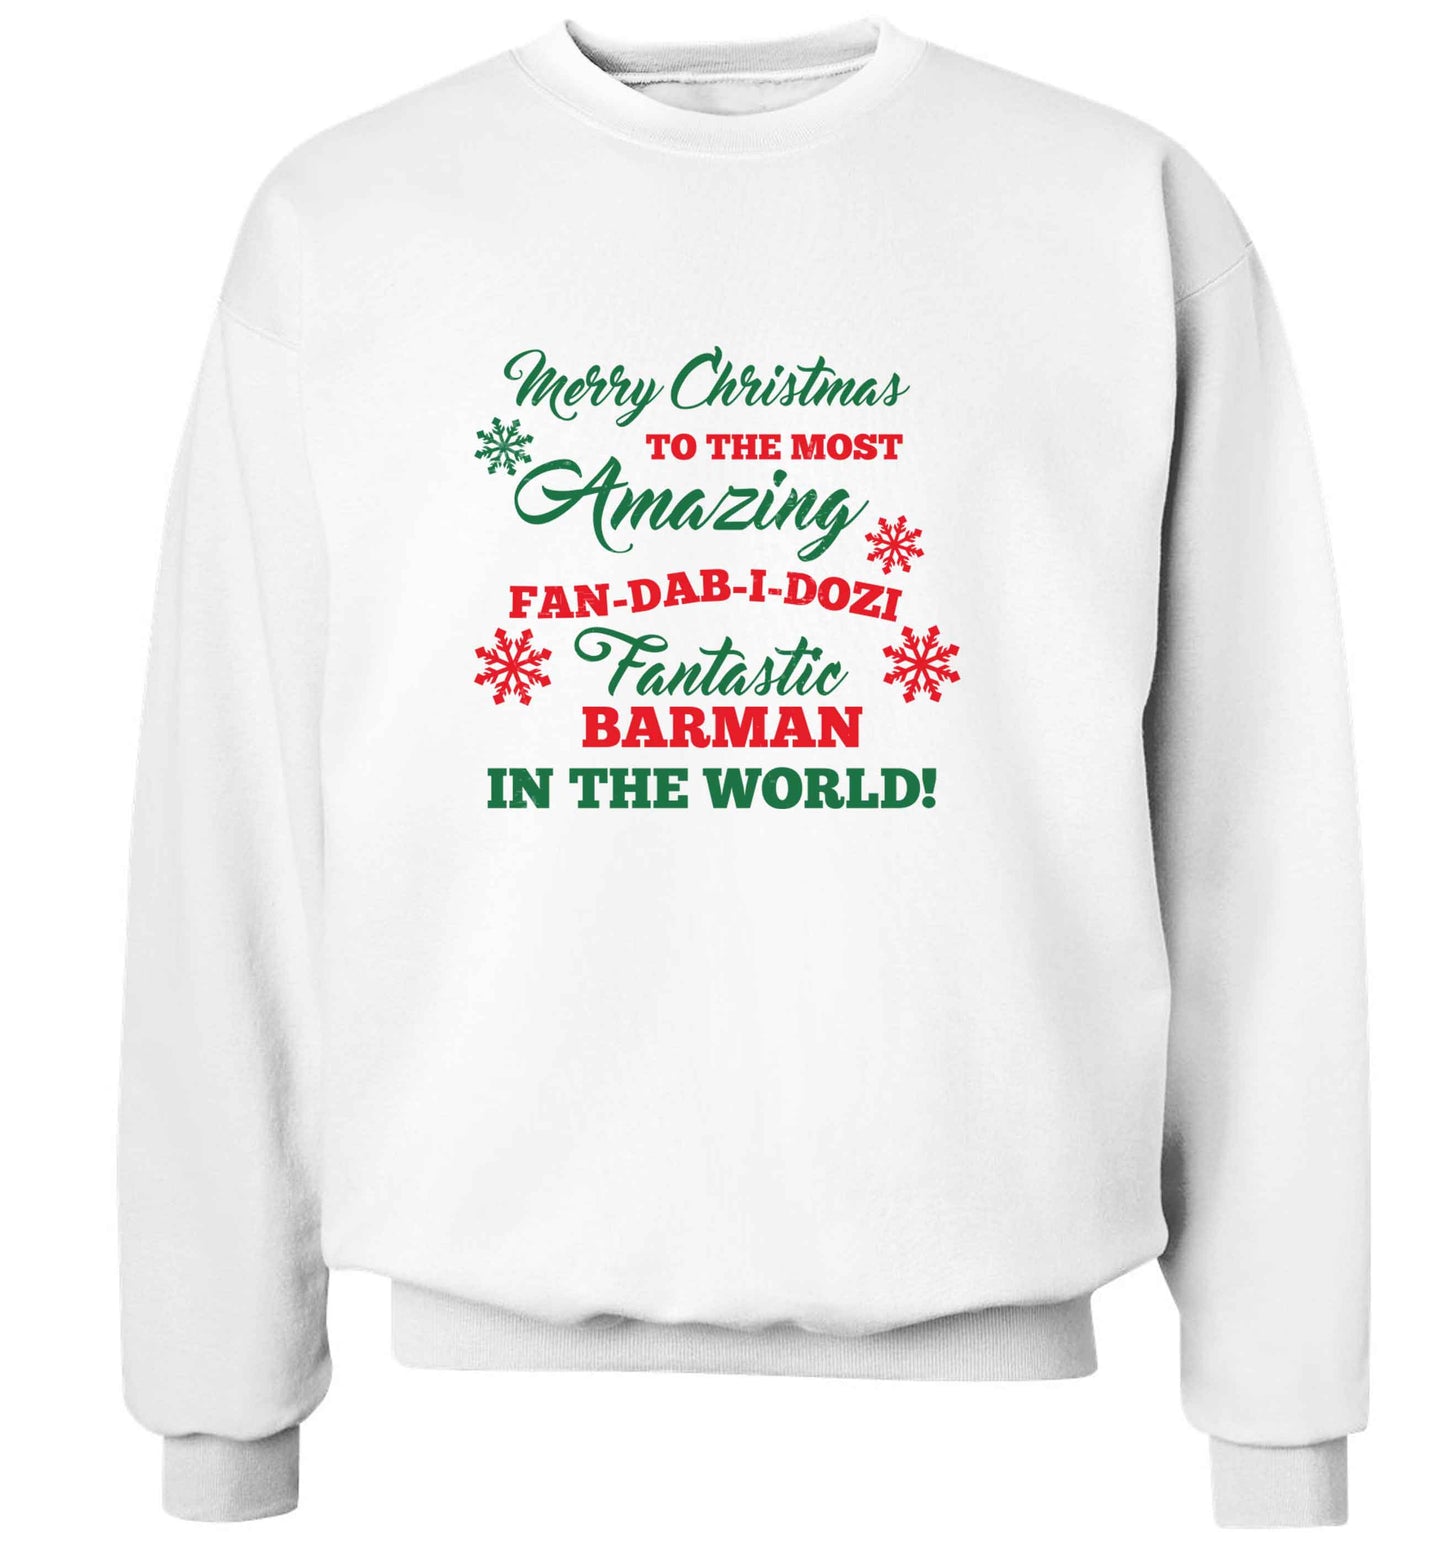 Merry Christmas to the most amazing barman in the world! adult's unisex white sweater 2XL